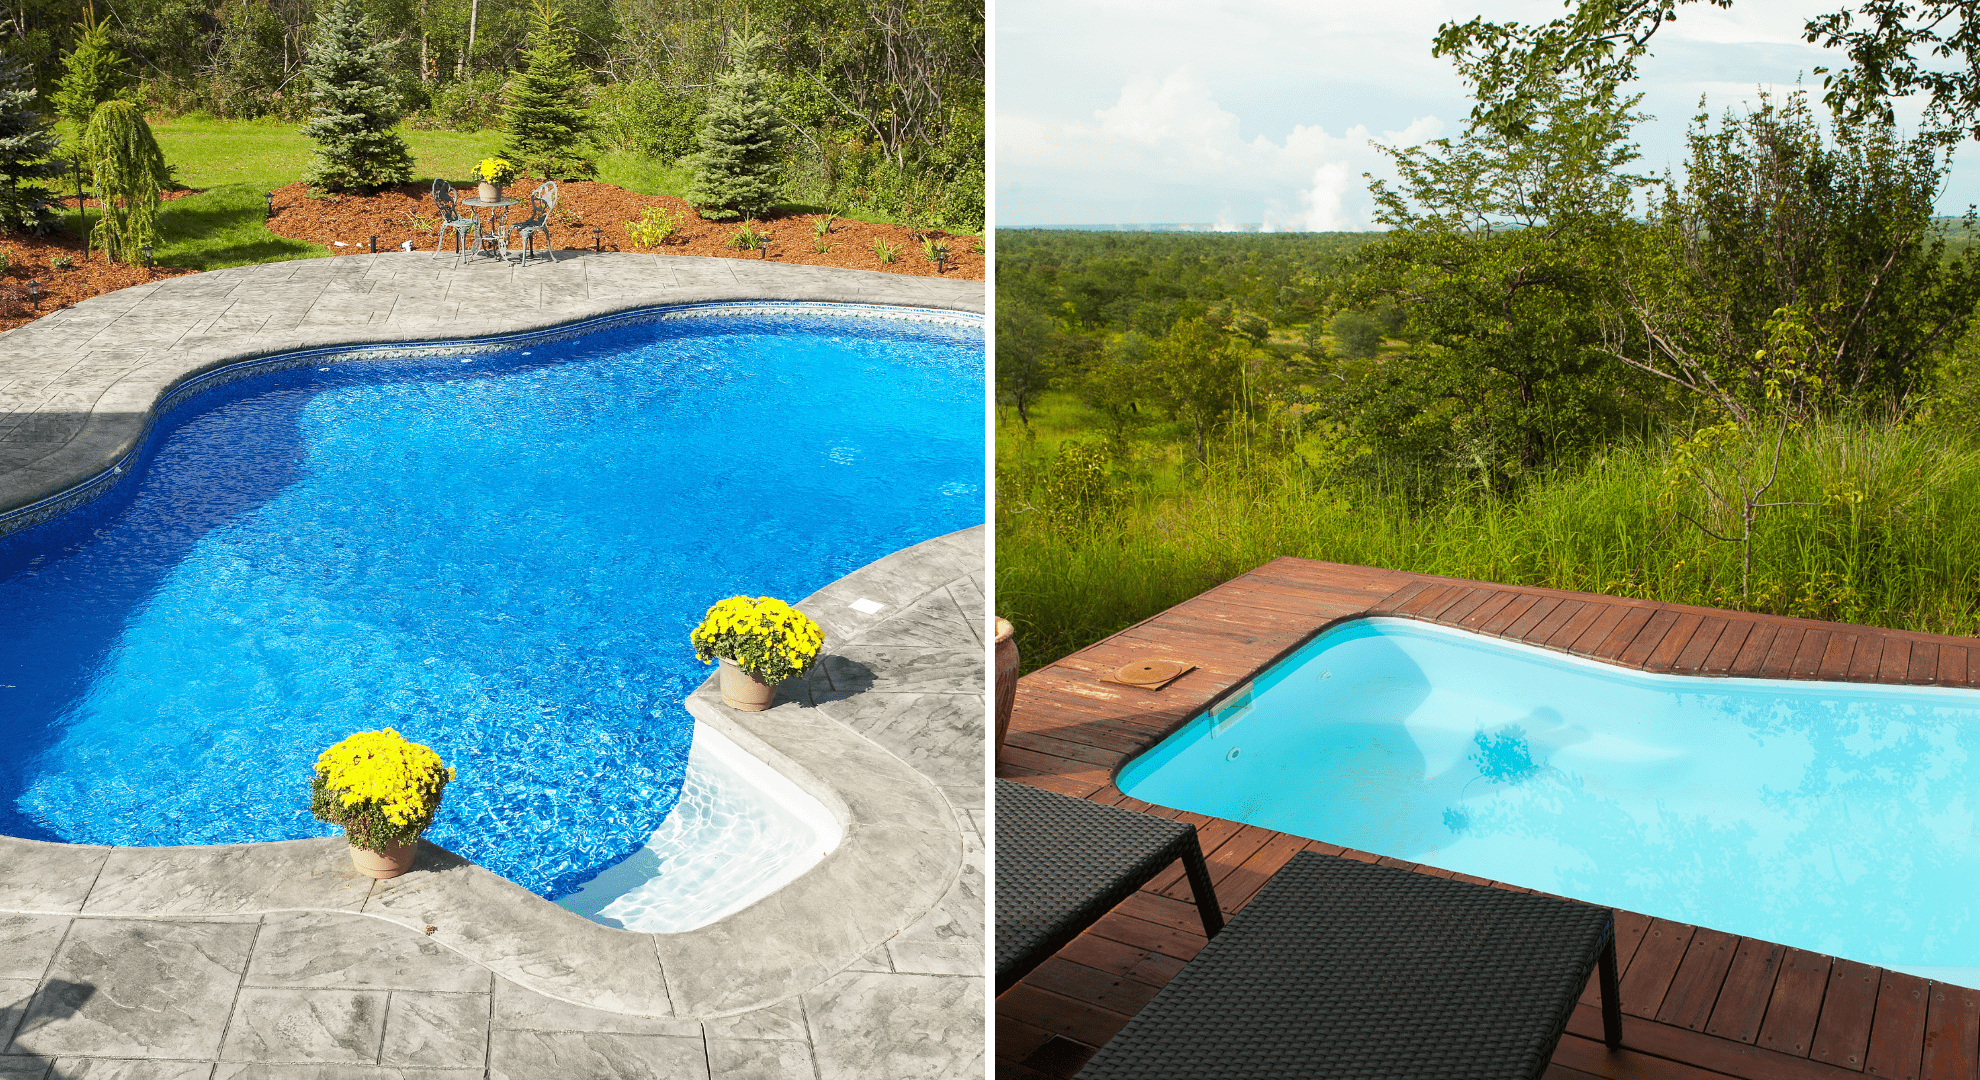 Landscaping Ideas for Small Inground Pools